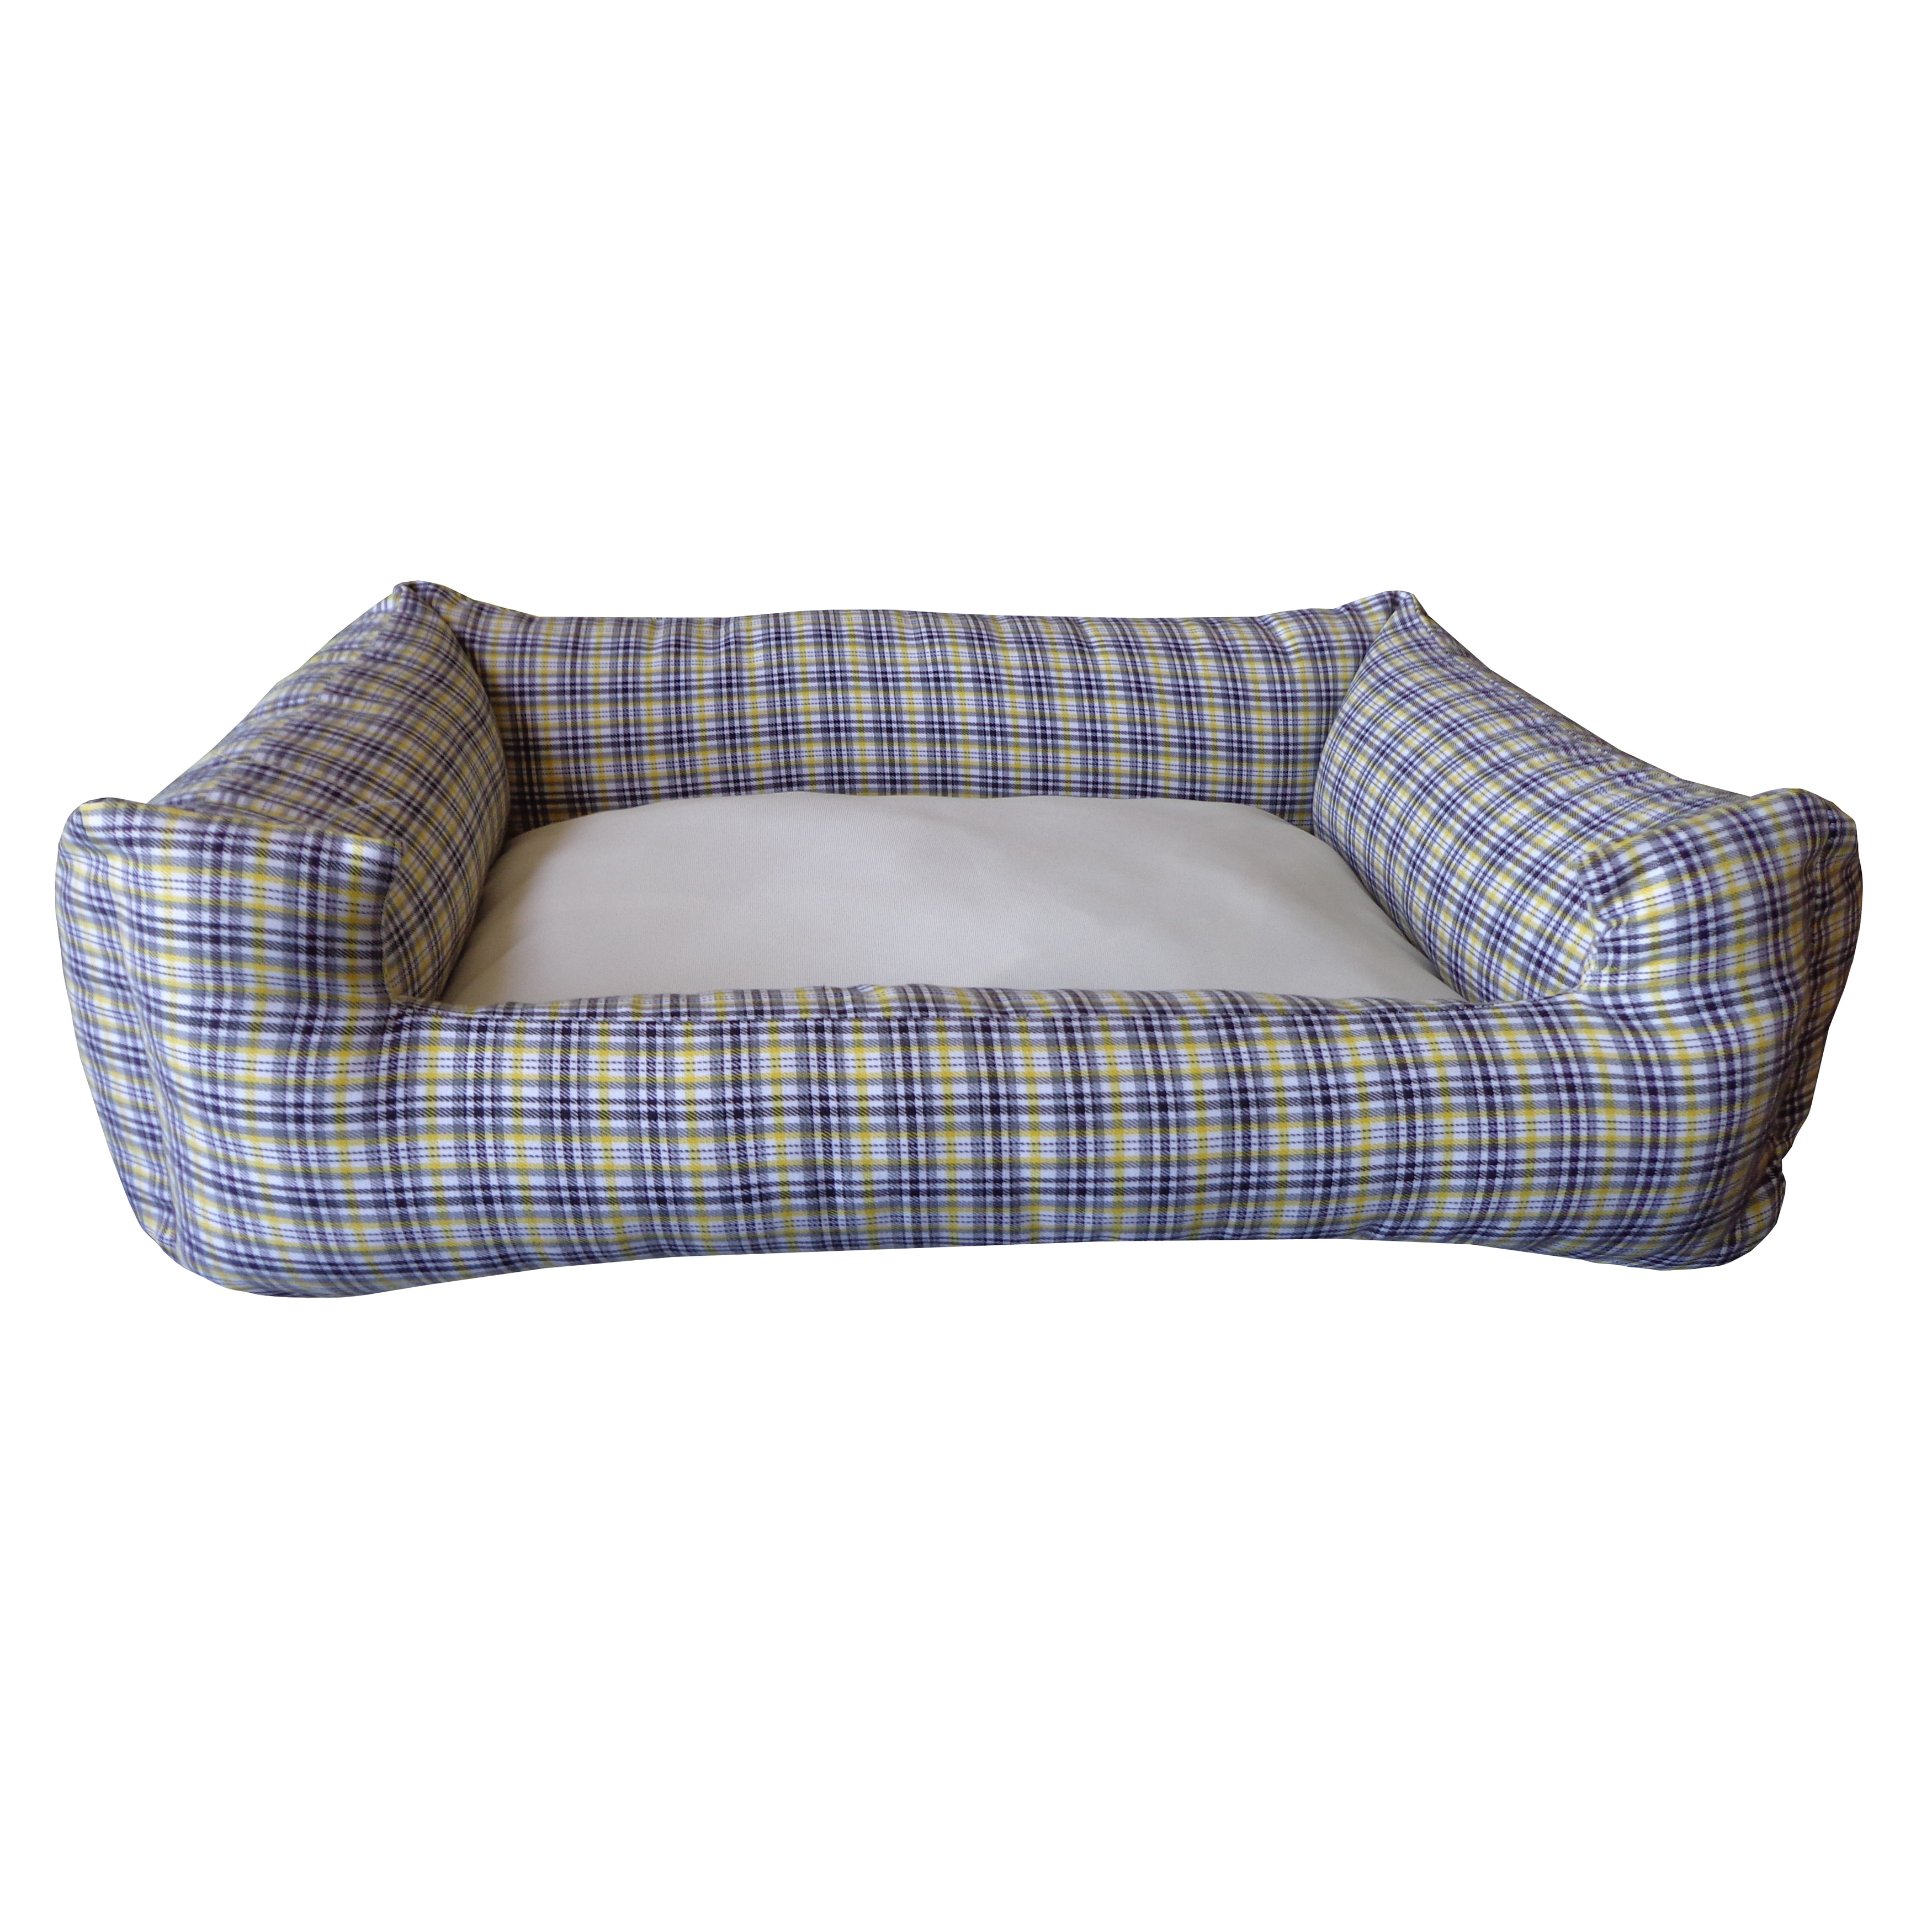 Plaid Multi Small Chill Pet Bed  ™ Shopping   The Best